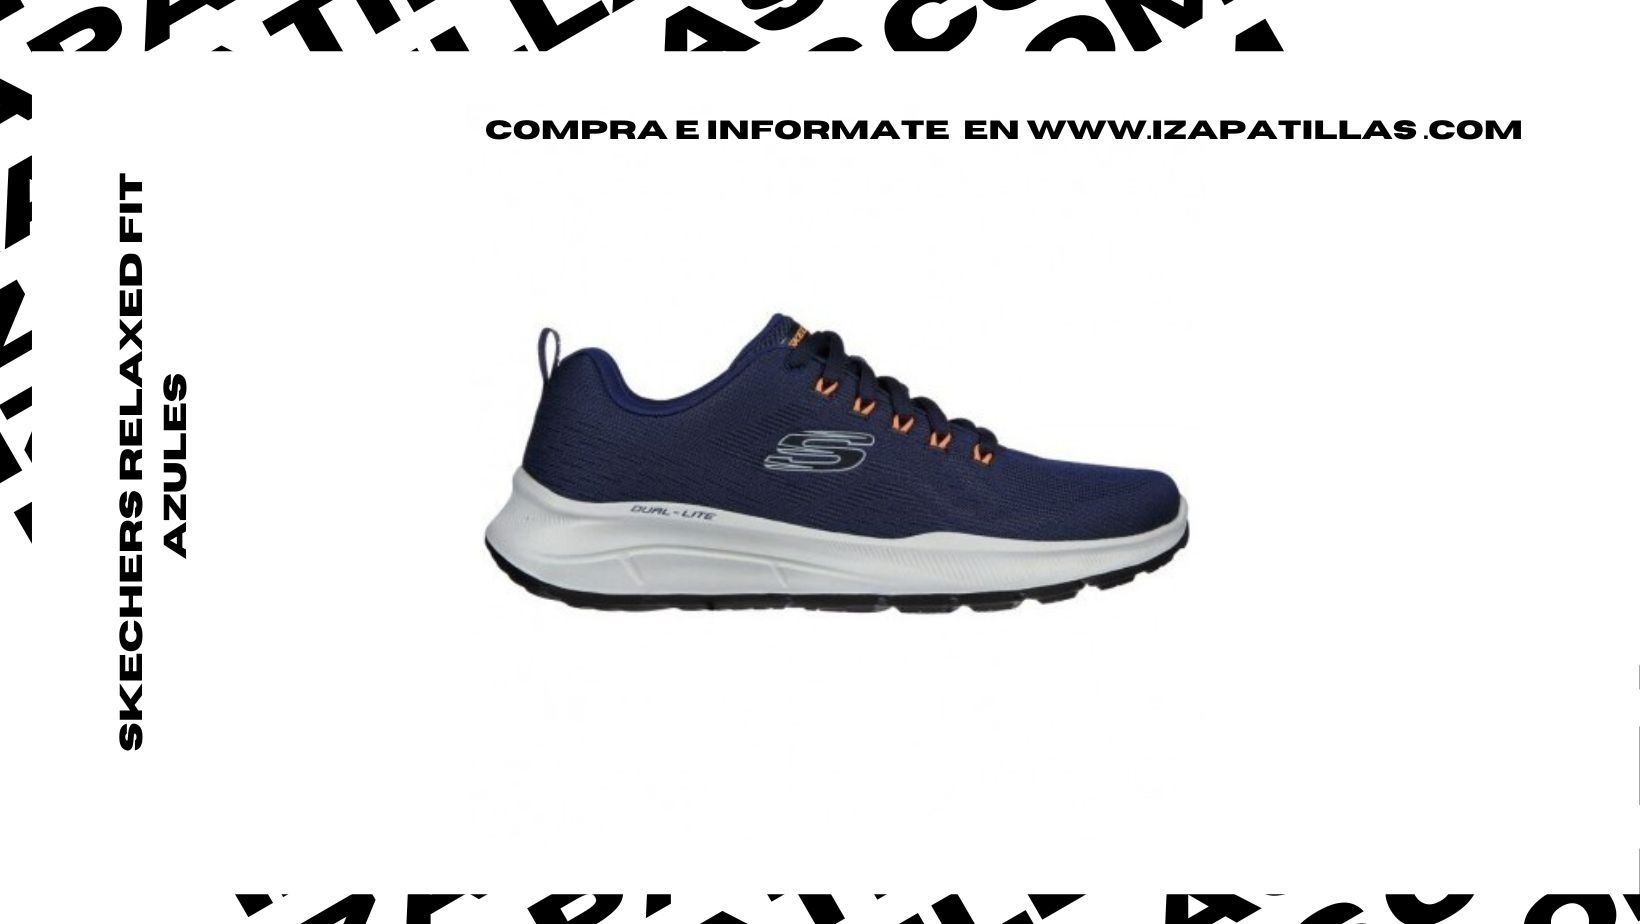 Relaxed Fit NVOR // Comprar Skechers Hombre Azul // Relaxed Fit